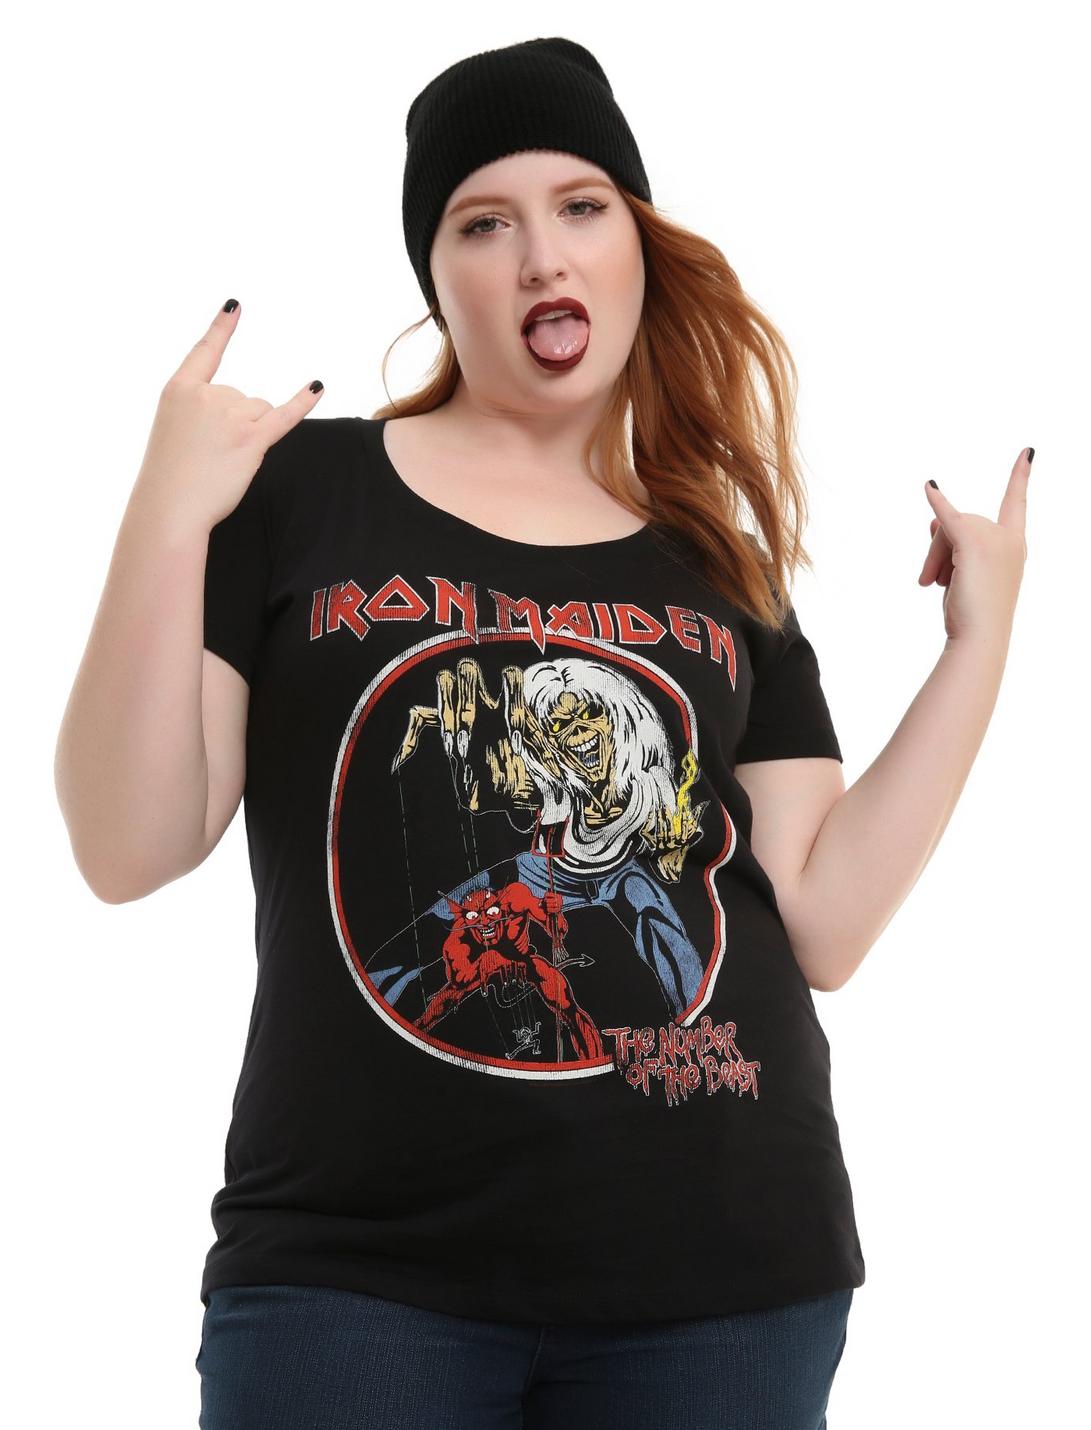 Iron Maiden Number Of The Beast Girls T-Shirt Plus Size, BLACK, hi-res